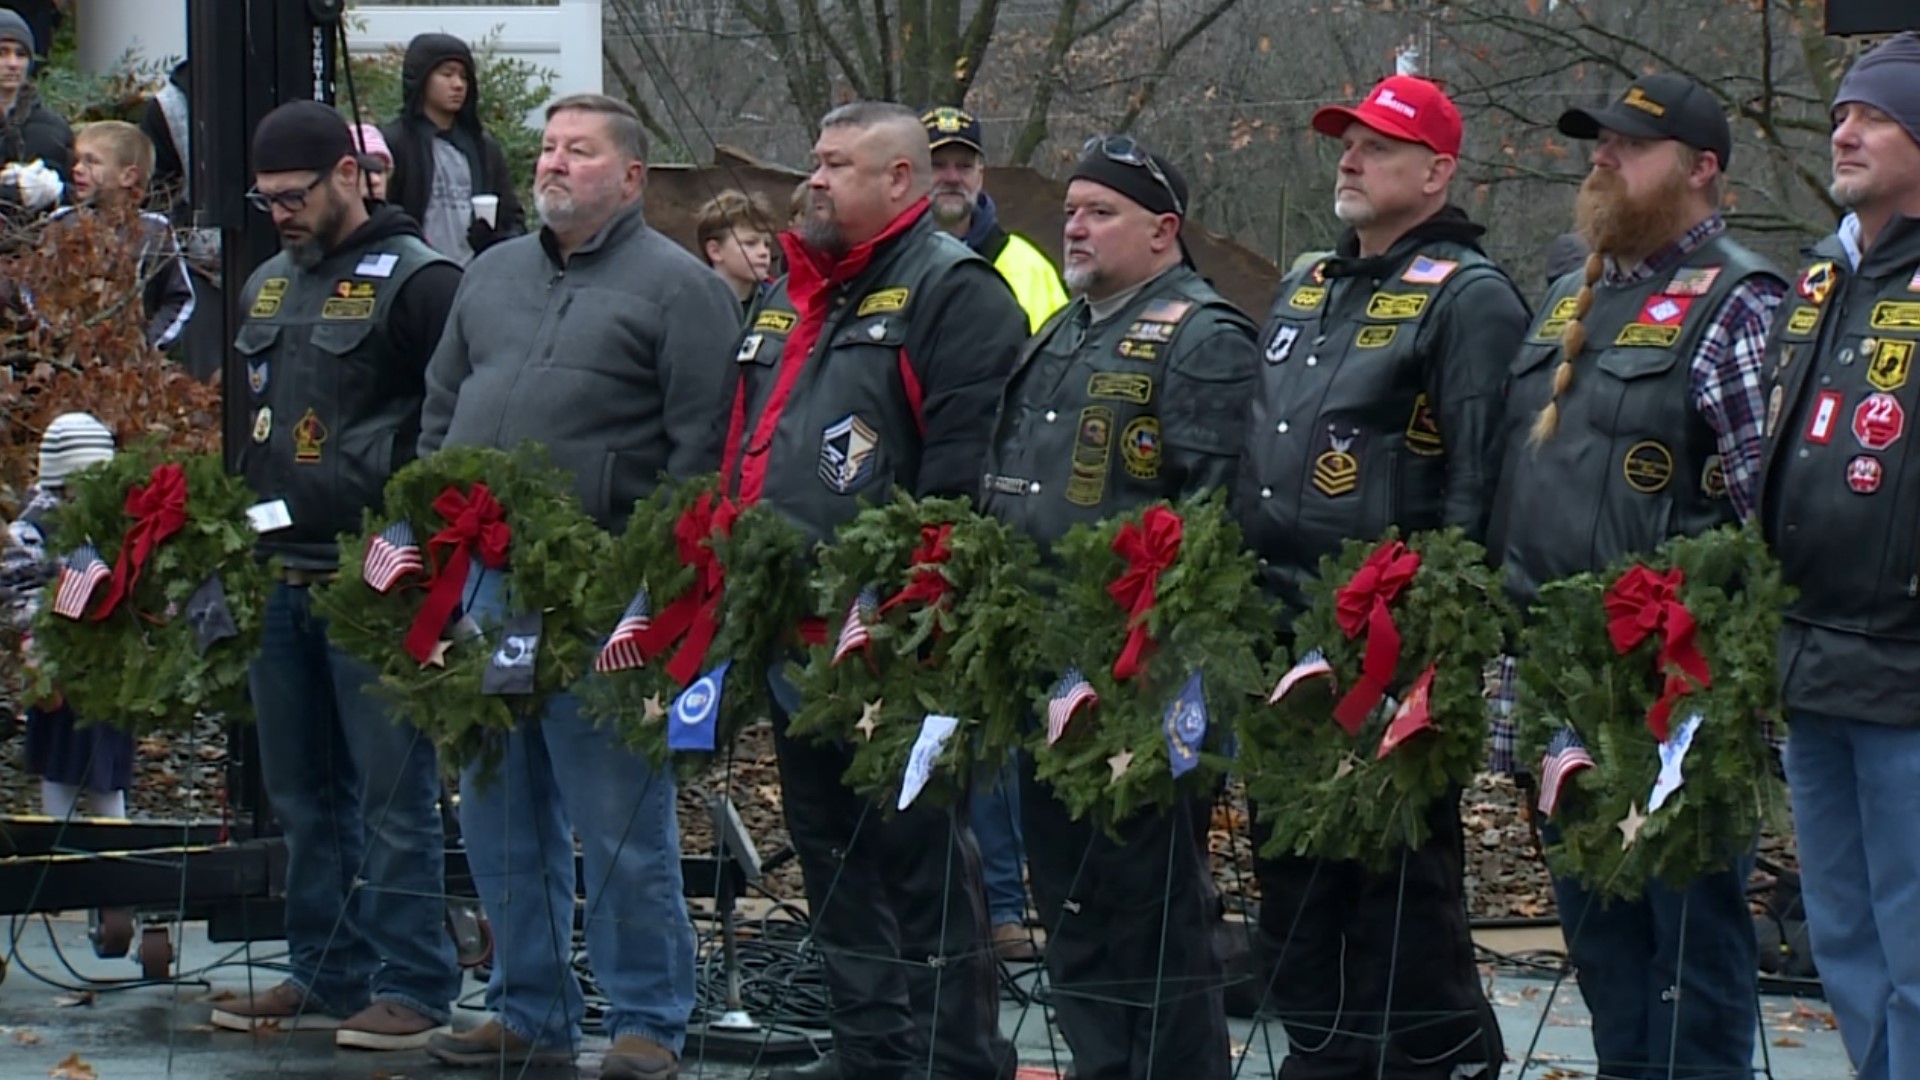 Every year, nonprofit group Wreaths Across America places Christmas wreaths on over two million veterans graves across the country.